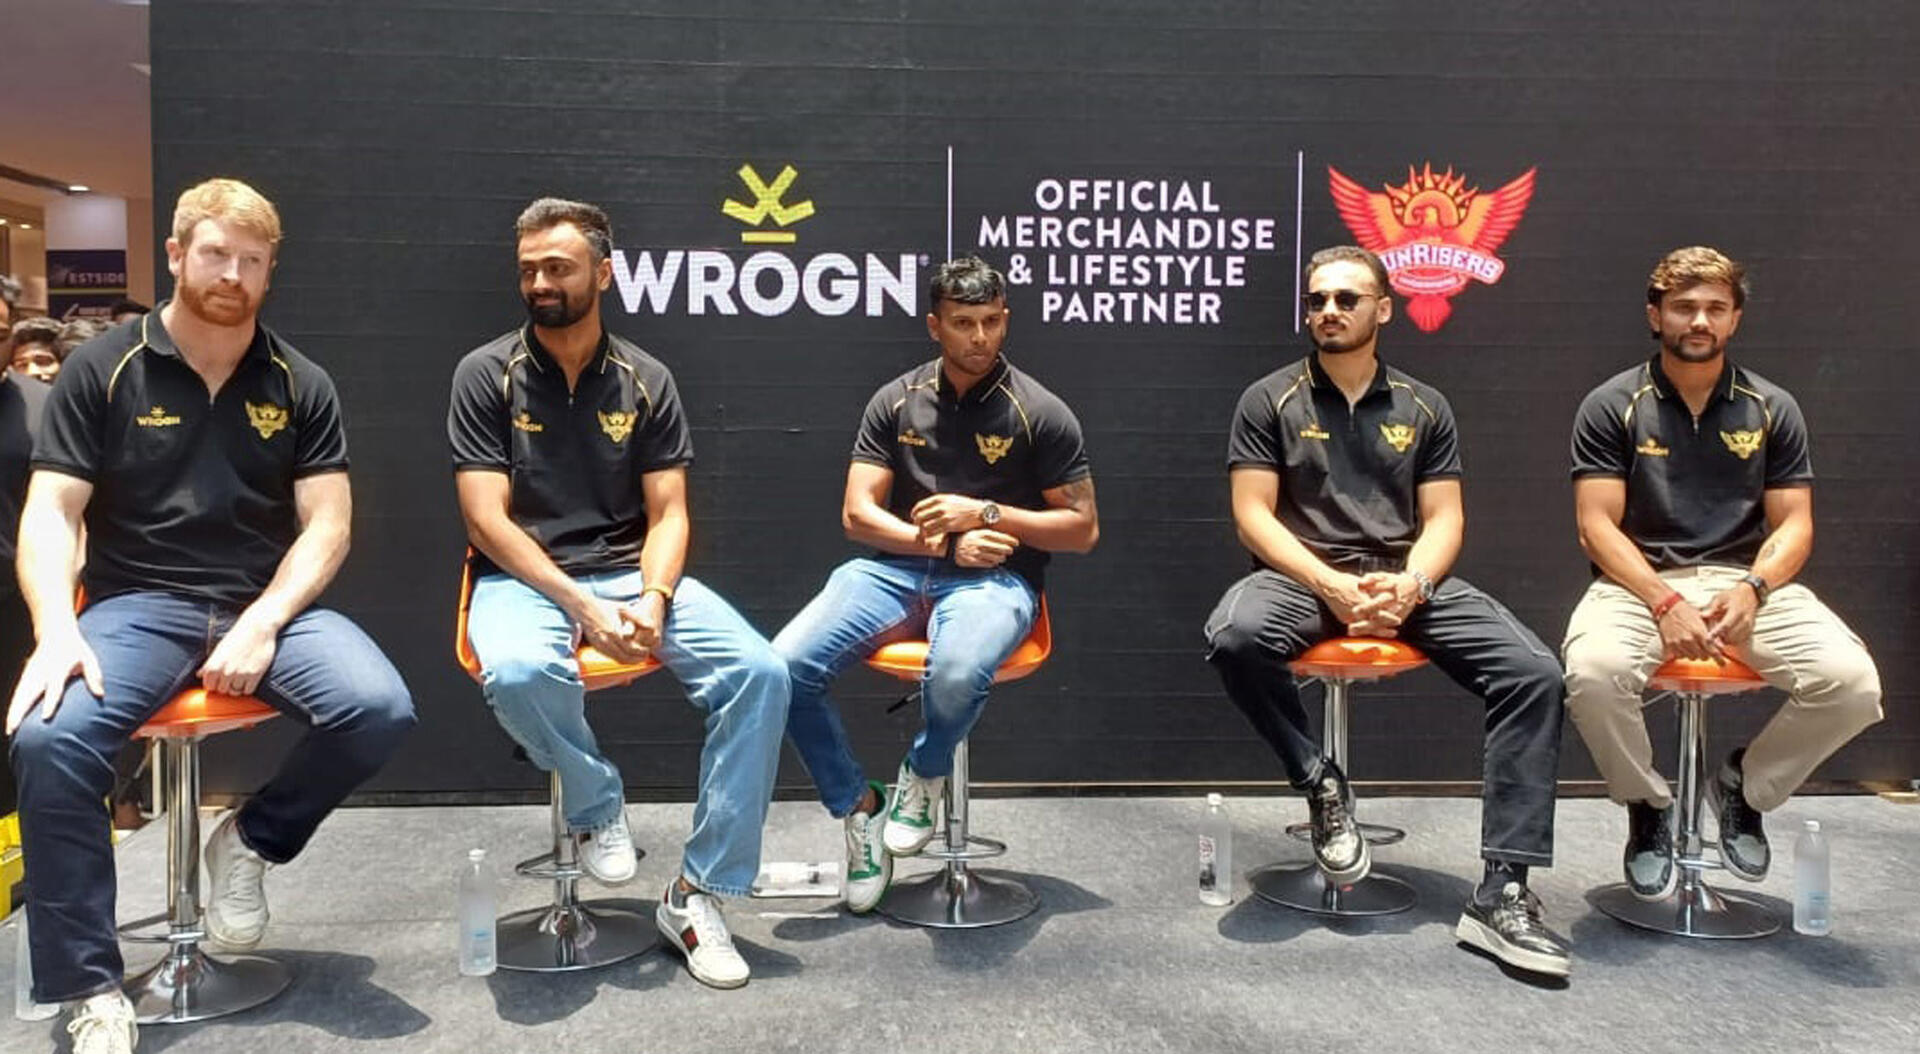 Sunrisers Hyderabad ace cricketers engage in a spirited exchange with the exuberant fans at Wrogn, India’s  prominent youth fashion and lifestyle brand!